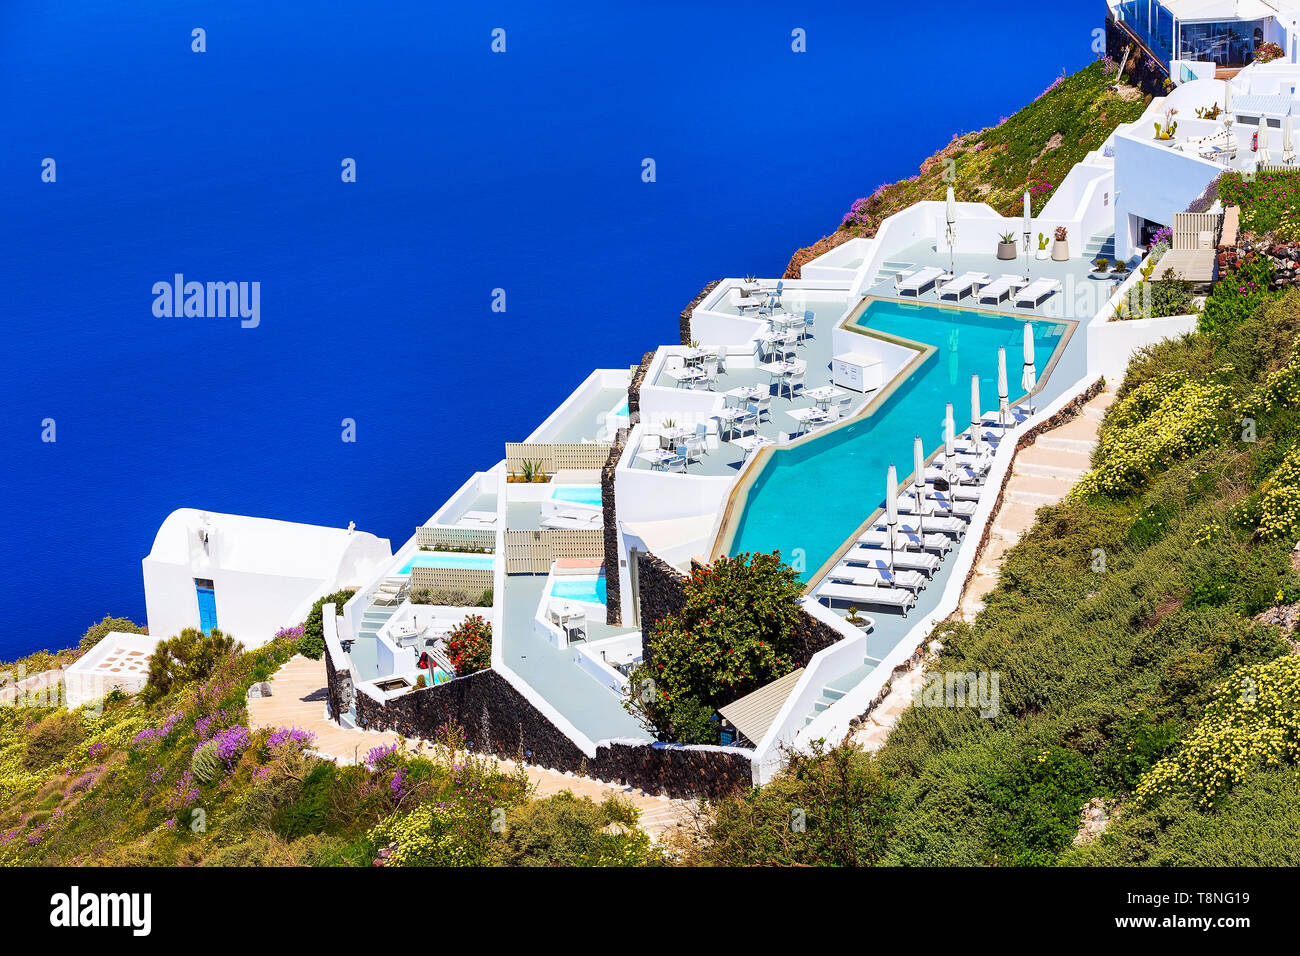 Image of Cyclades Architecture Hotels Houses Over The Caldera In